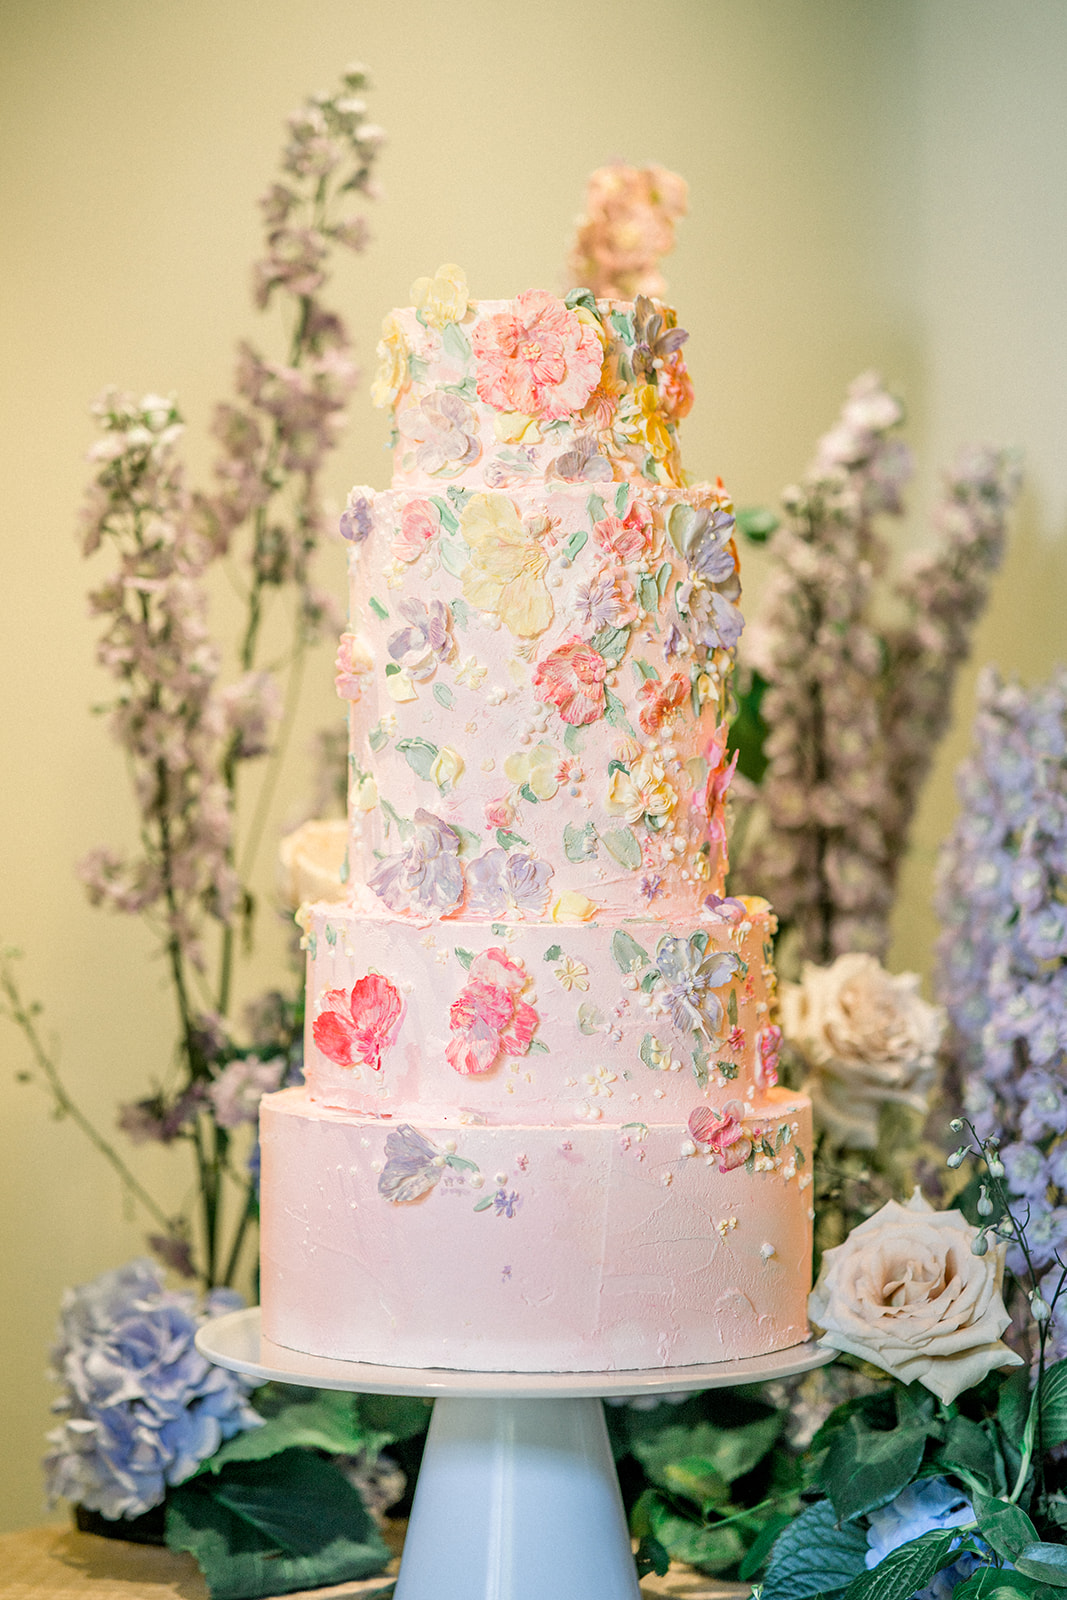 Opulent wedding cake with floral accents by Duchess Of Desserts, set against a backdrop of Cairnwood Estate's grandeur.